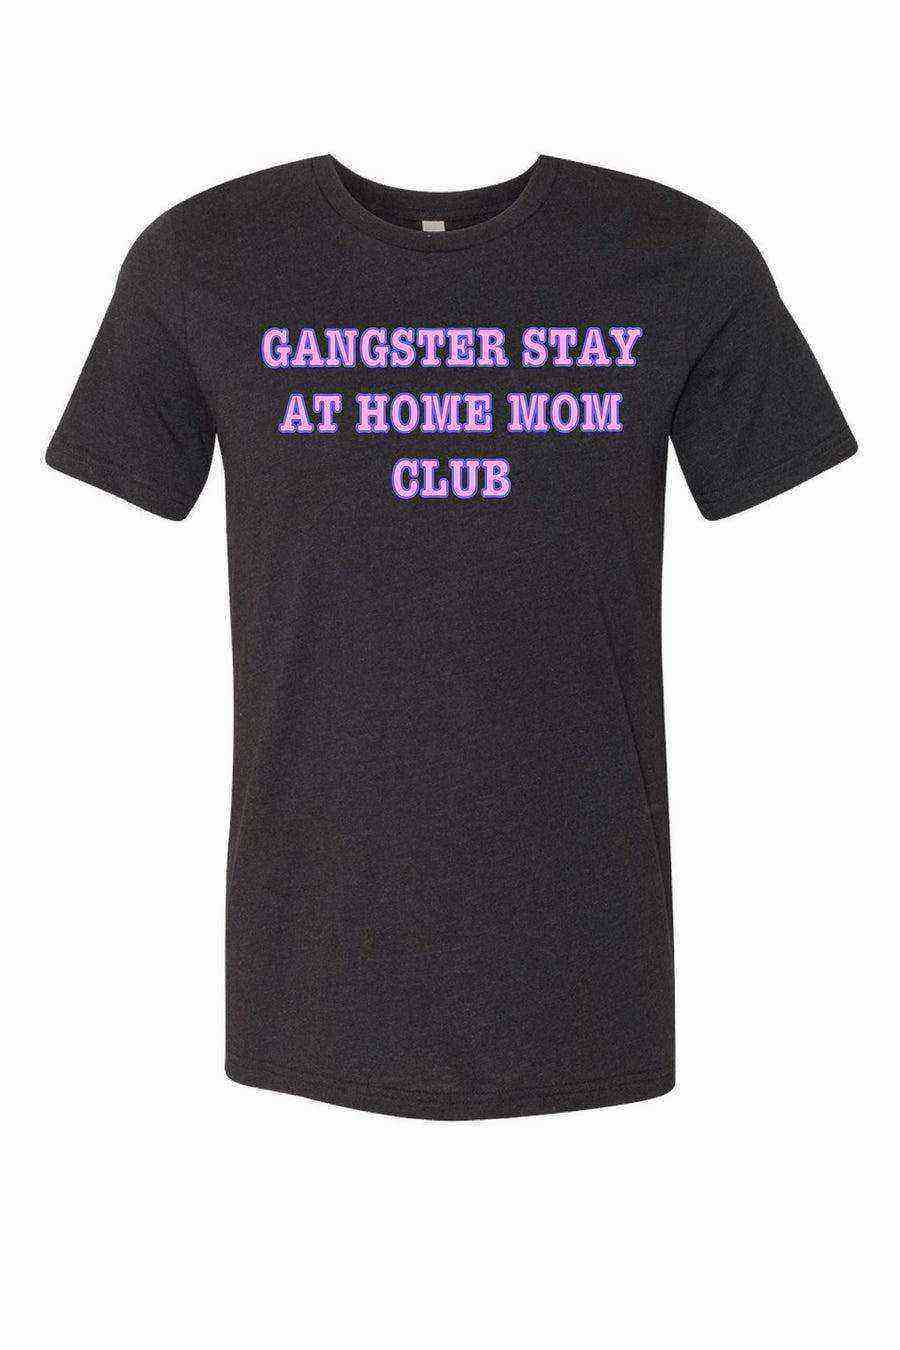 Gangster Stay At Home Mom Club Shirt - Dylan's Tees